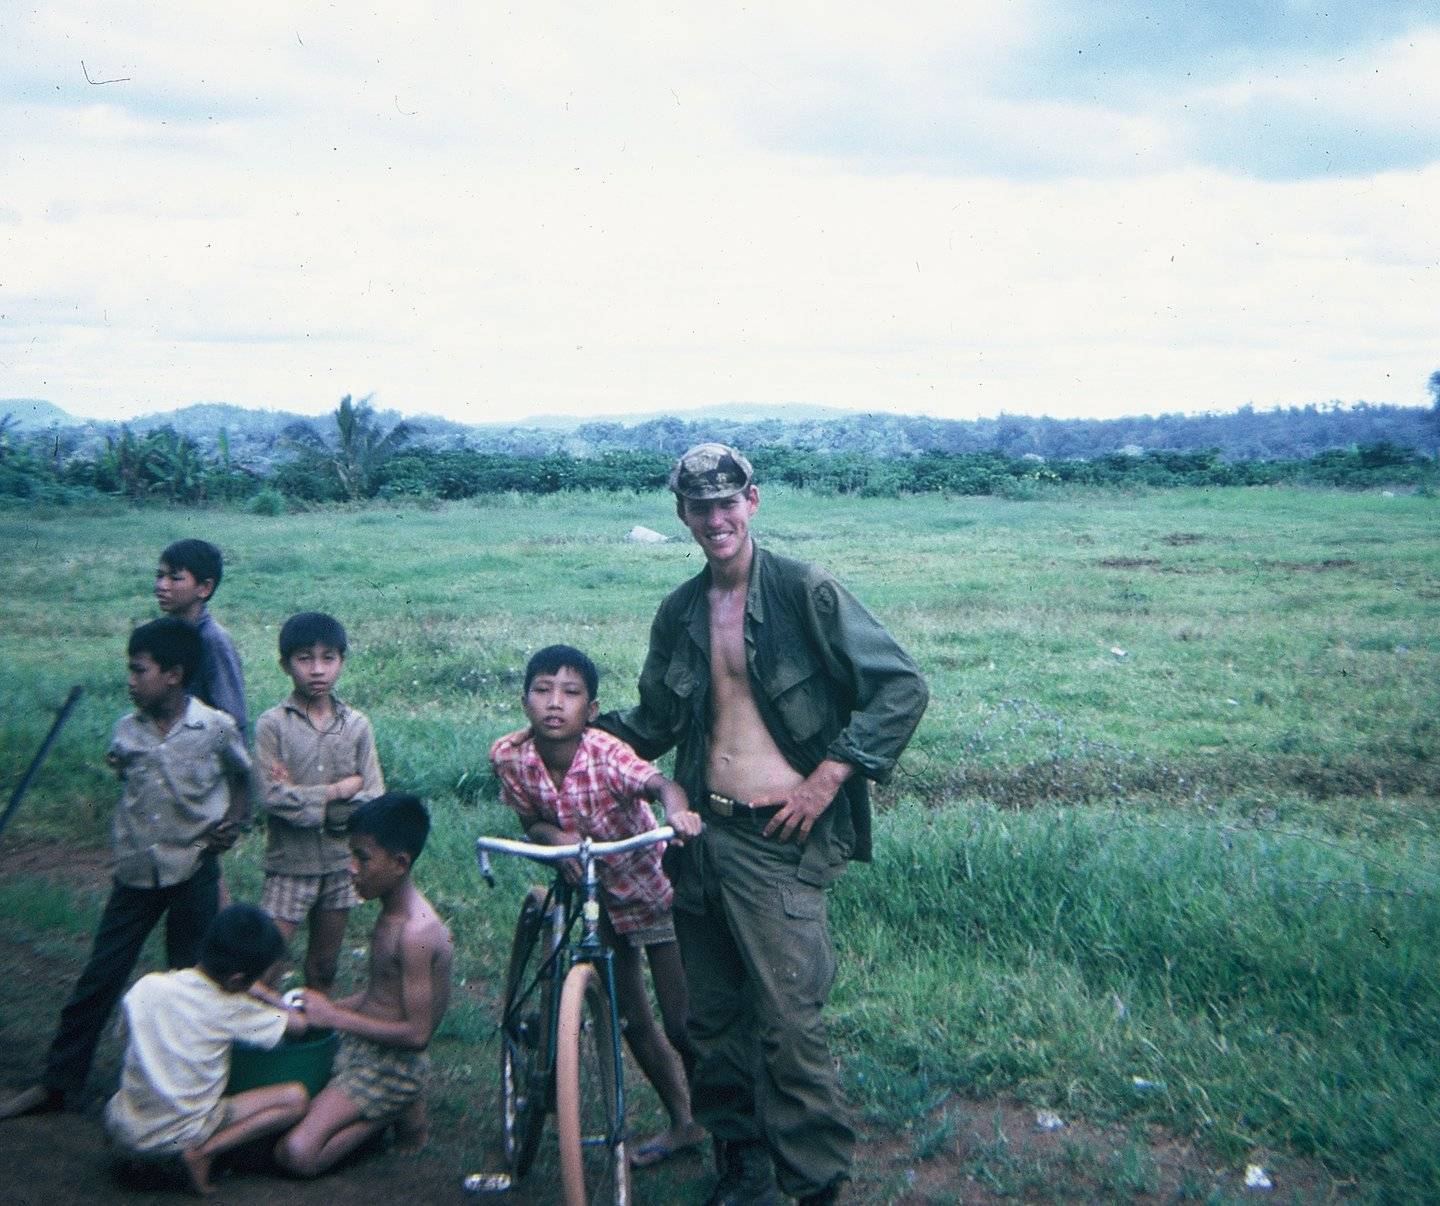 U.S. soldier in a verdant field with a group of Vietnamese children.